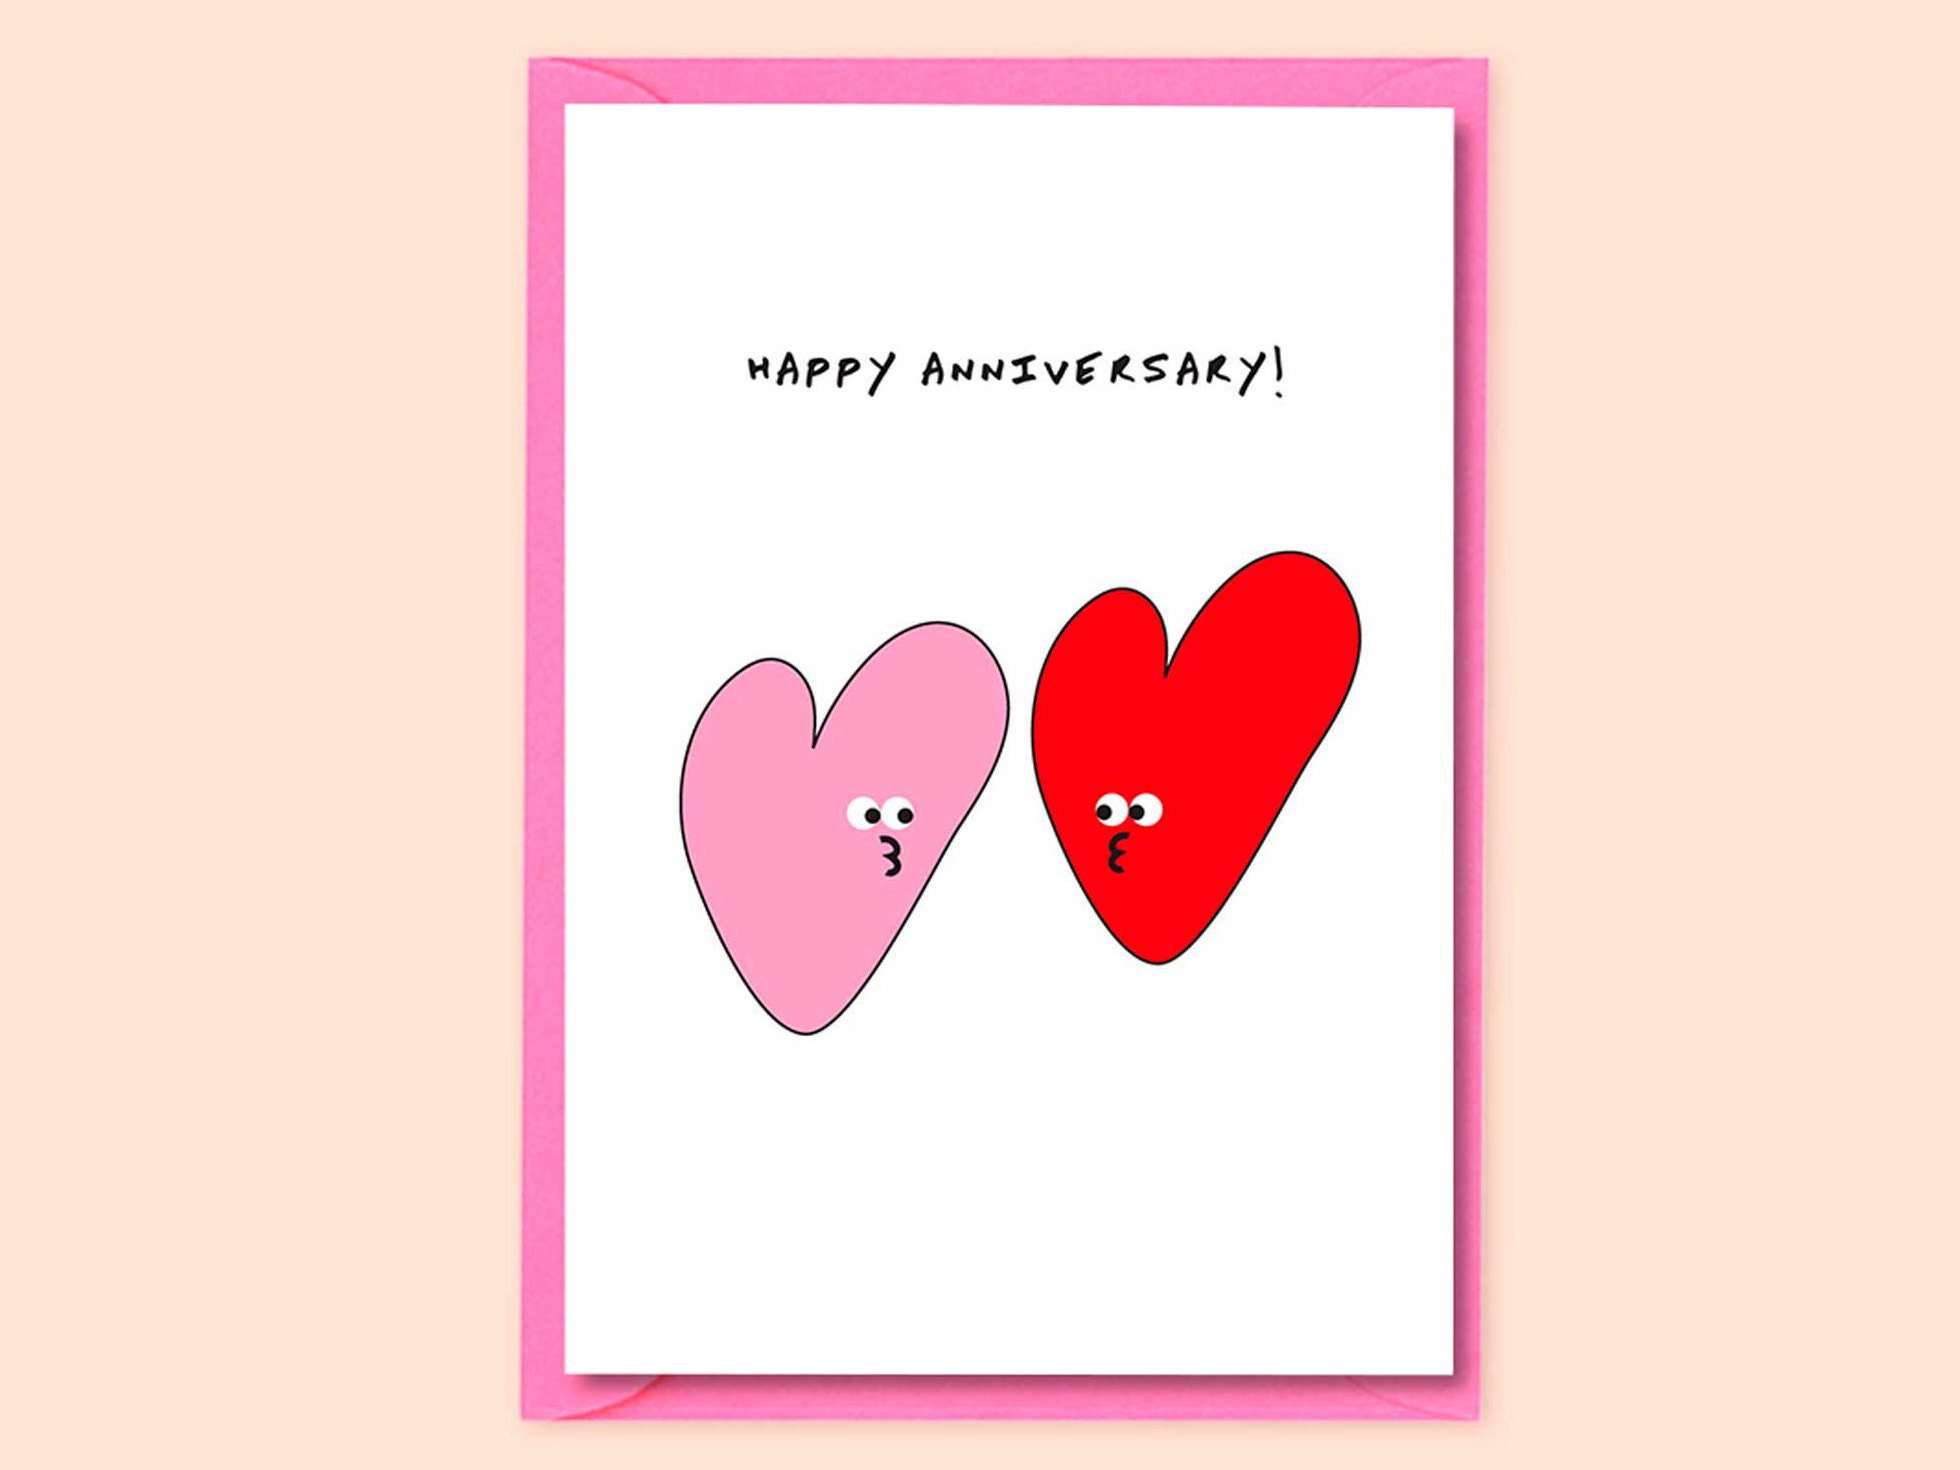 Happy Anniversary Card Quirky Cute Wedding Anniversary Card pic